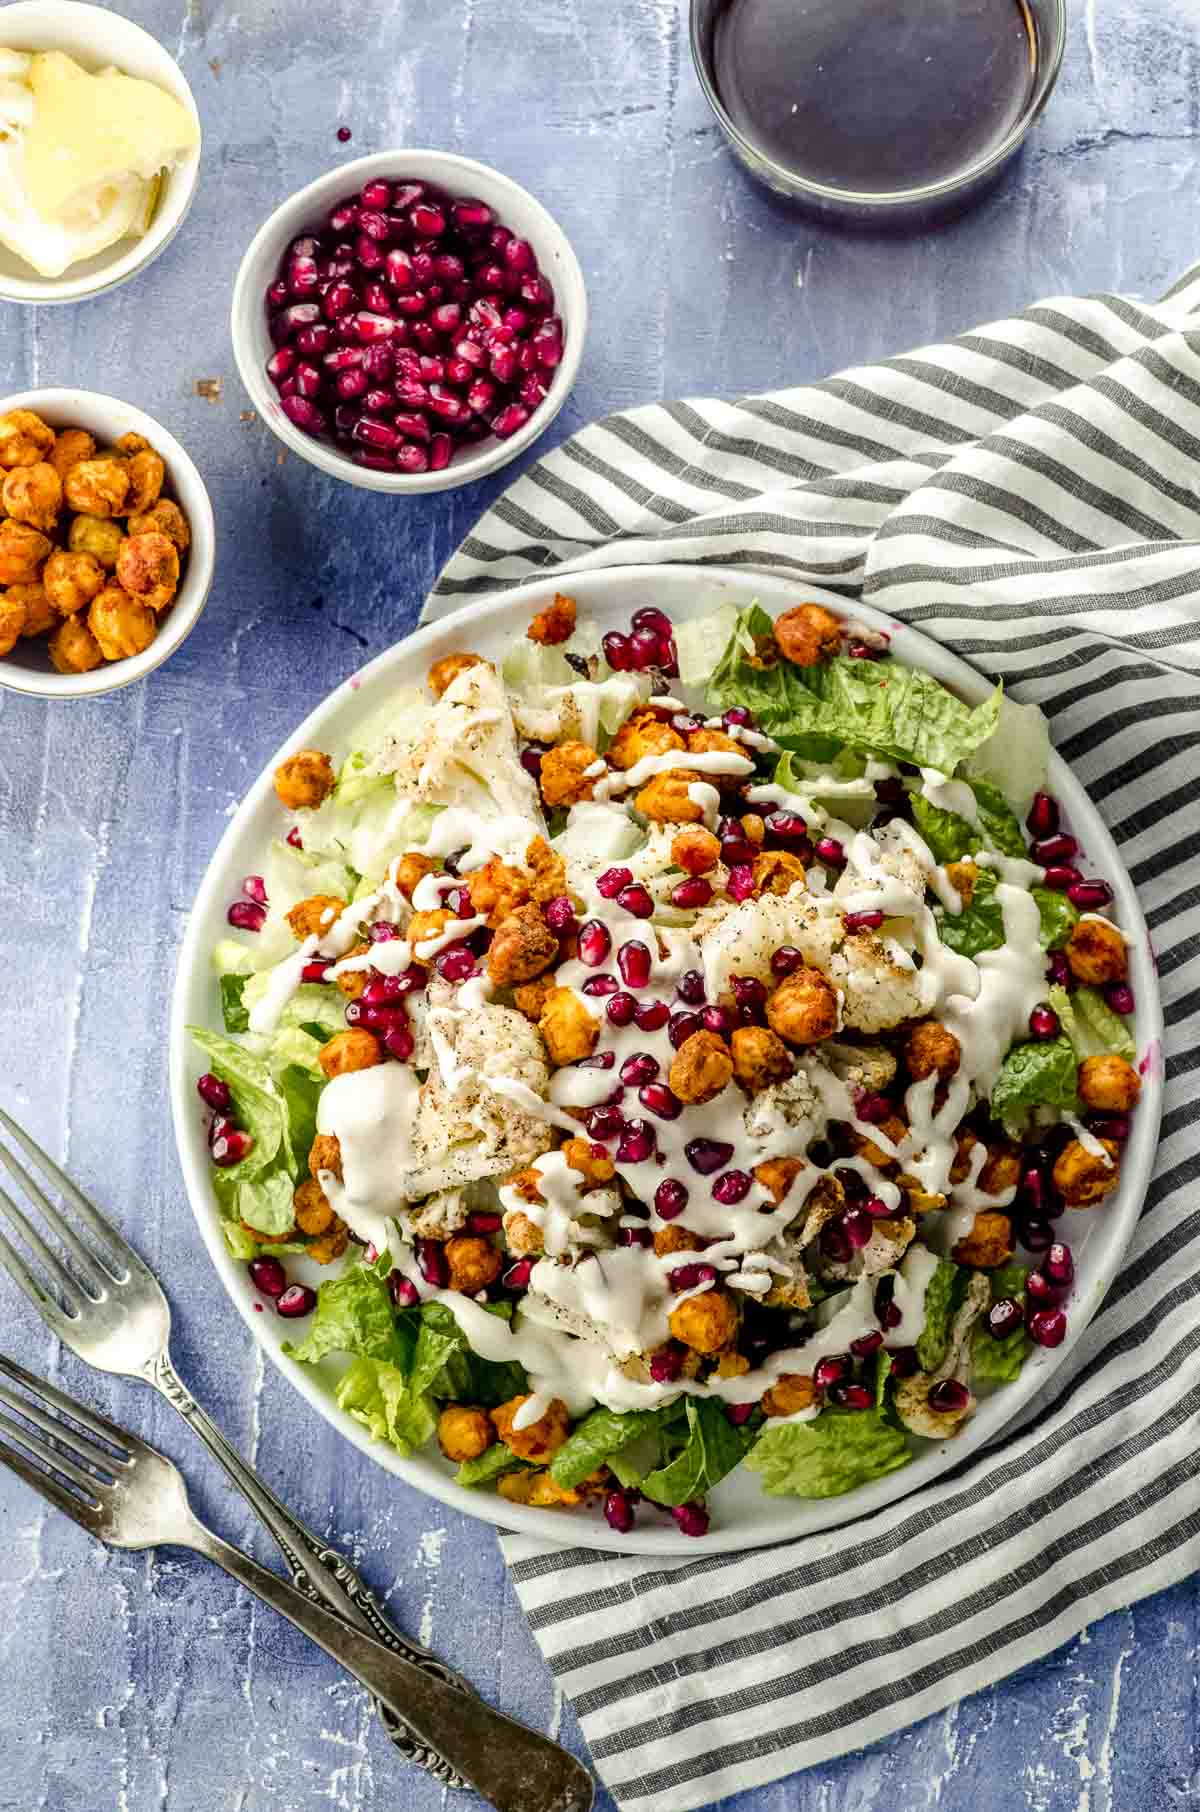 Overhead view of a roasted cauliflower salad with spiced chickpeas